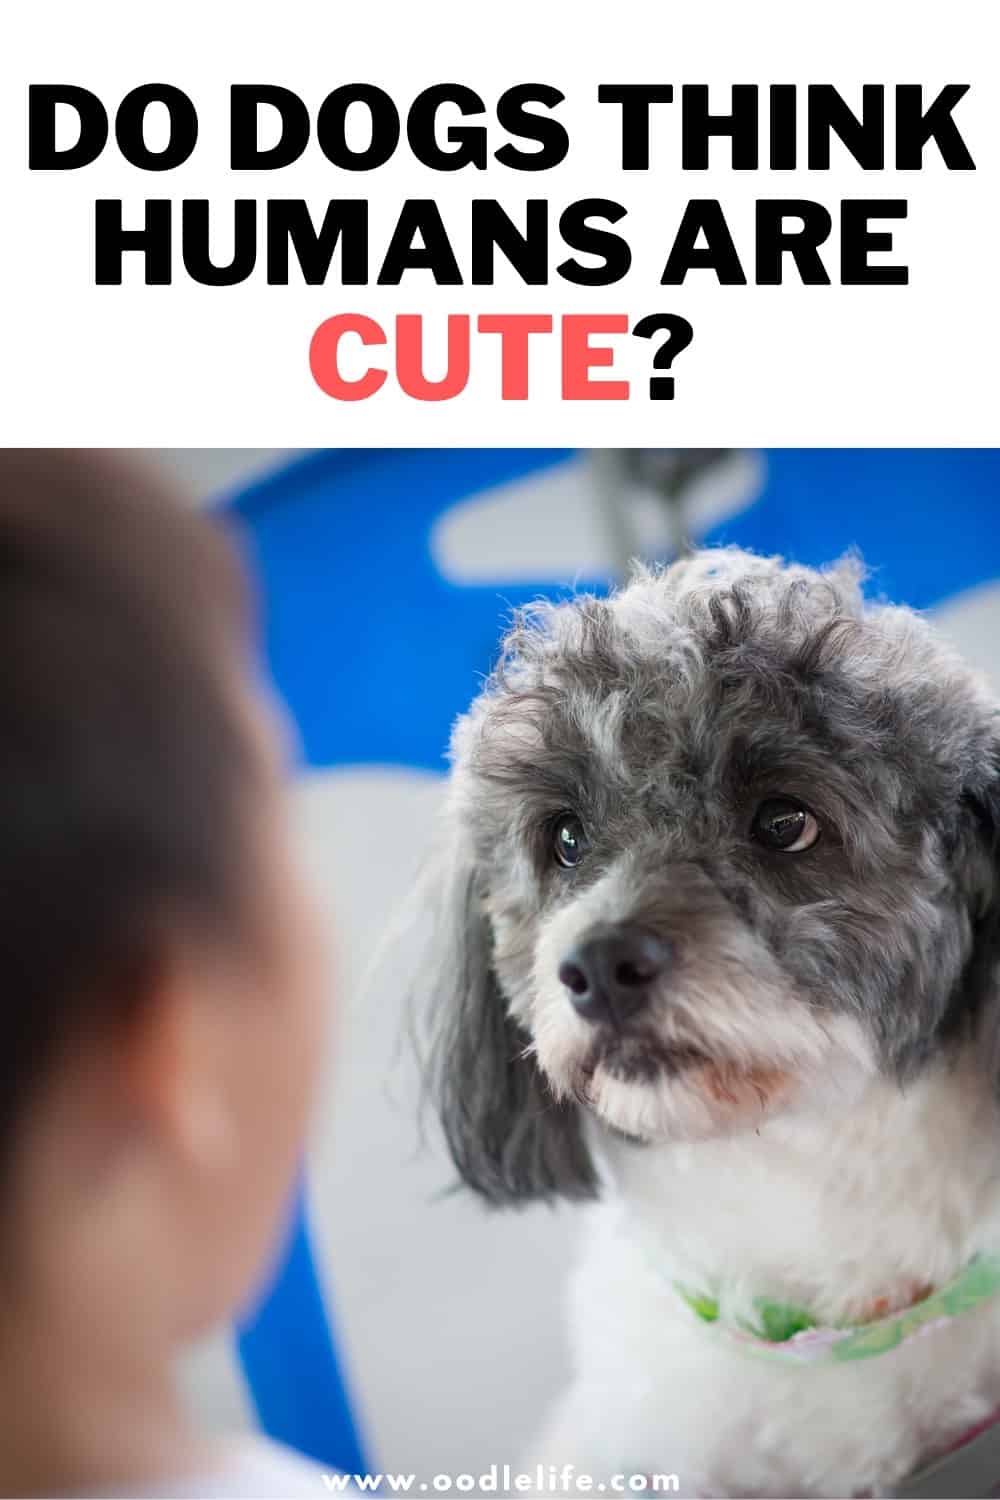 Do Dogs Think Humans Are Cute? - Oodle Life